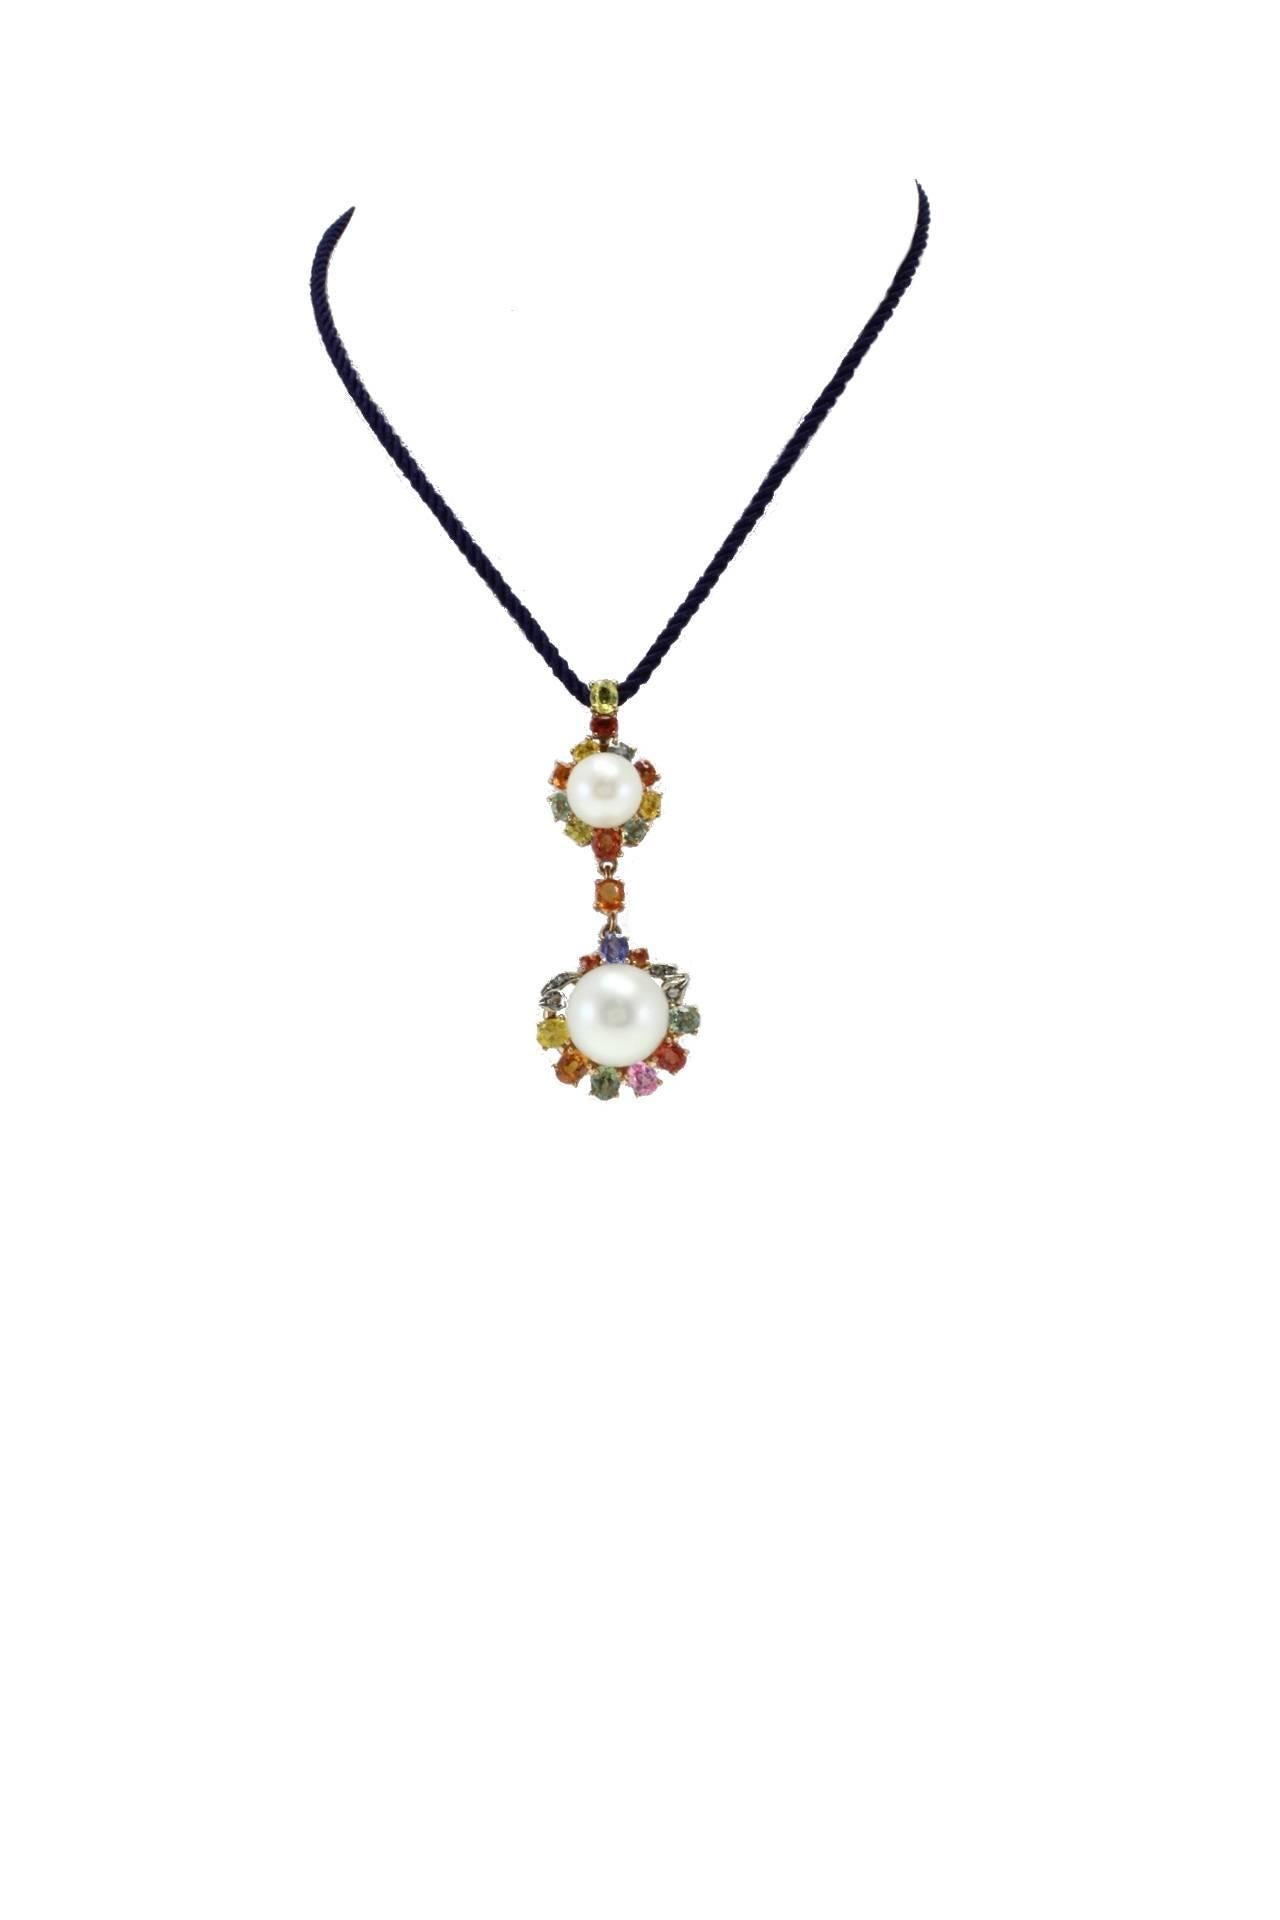 Shiny pendant in 9kt yellow gold and silver composed of two link pearls surrounded by multicolored sapphires. Around the biggest one there are even diamonds.
gold 1.00gr
silver 6.34gr
diamonds 0.05kt
sapphires 6.24kt
pearls 6.10gr
tot weight